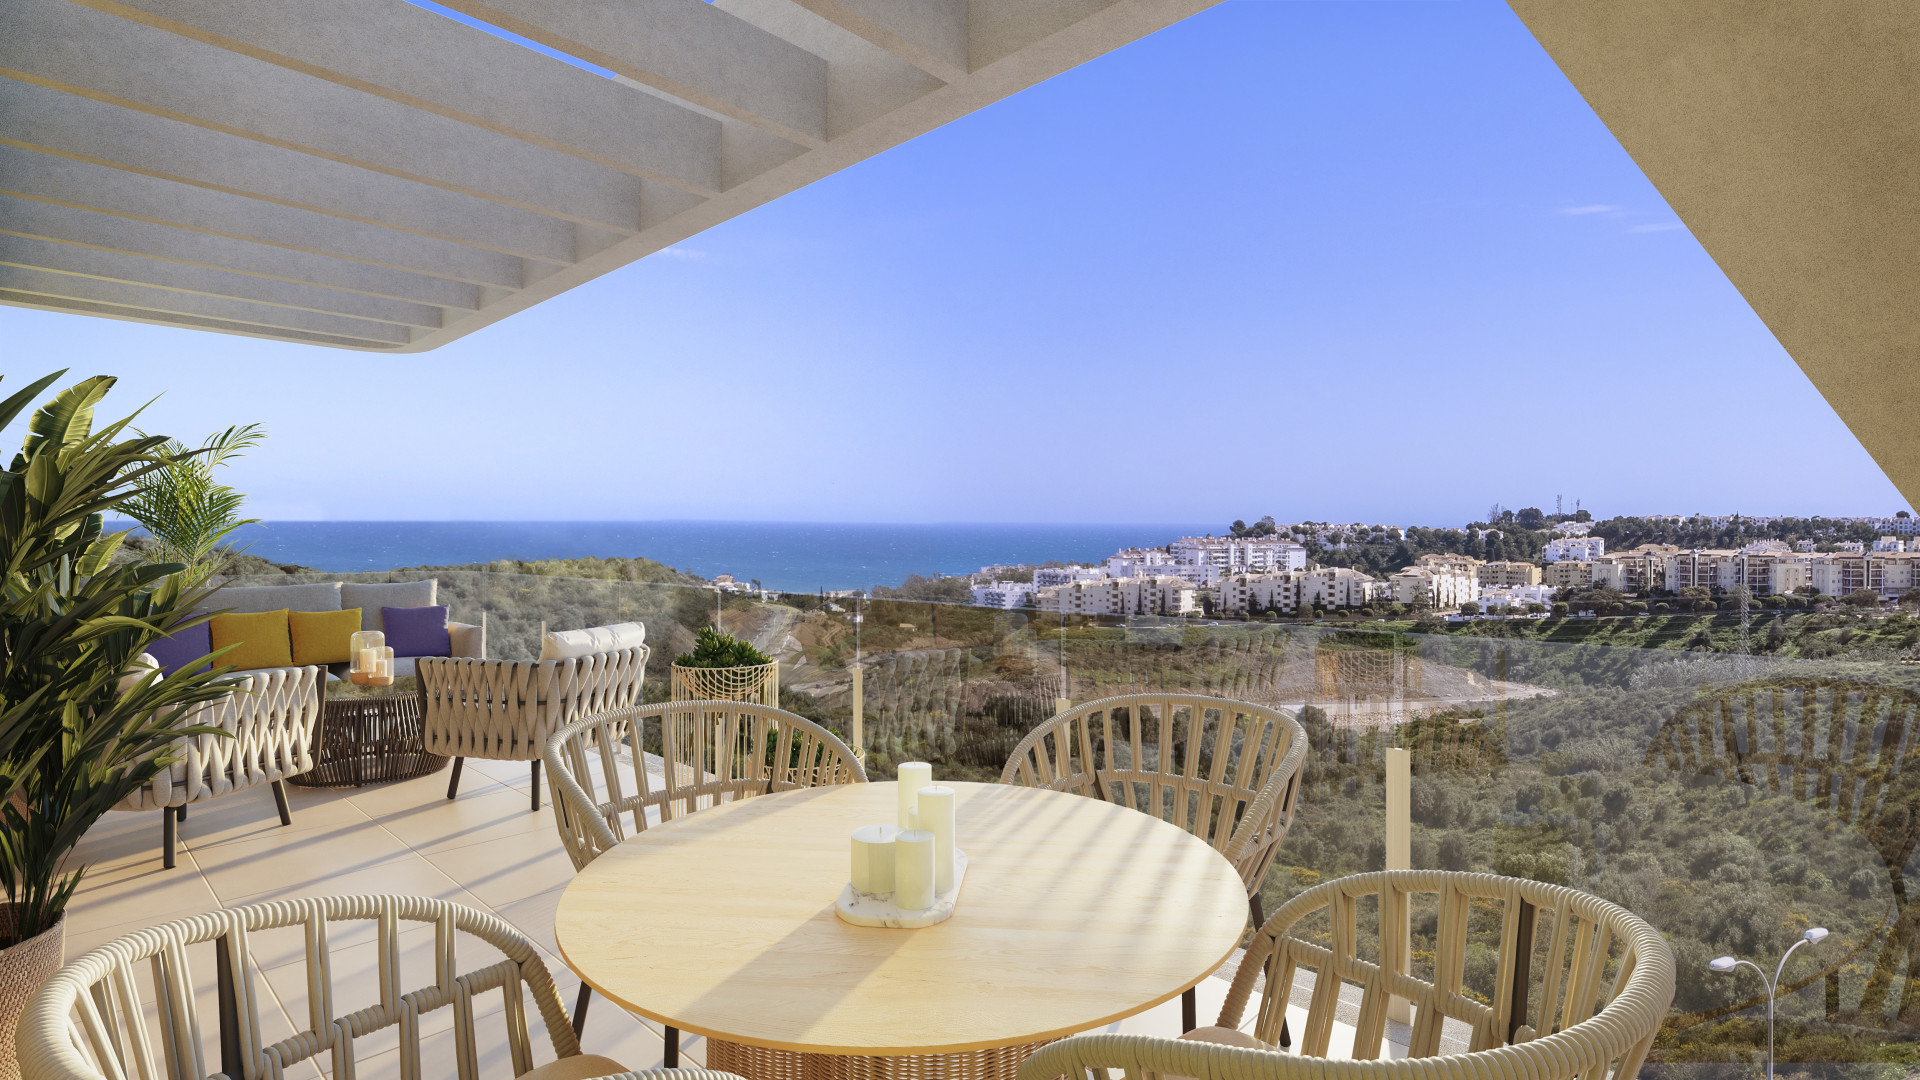 New and spacious three bedroom flat with private garden in Mijas. | Image 3